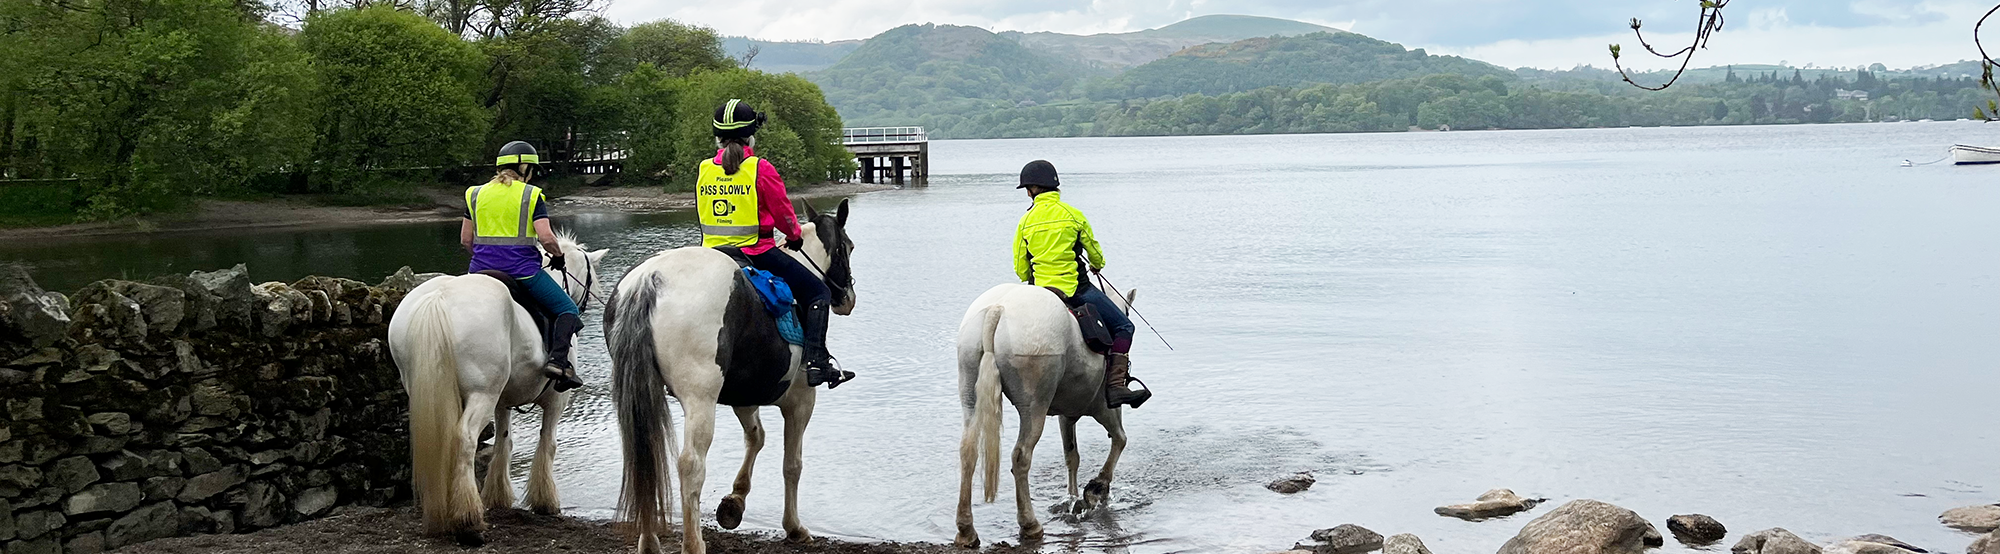 Horses from saddle back horse trails at Howtown Bay